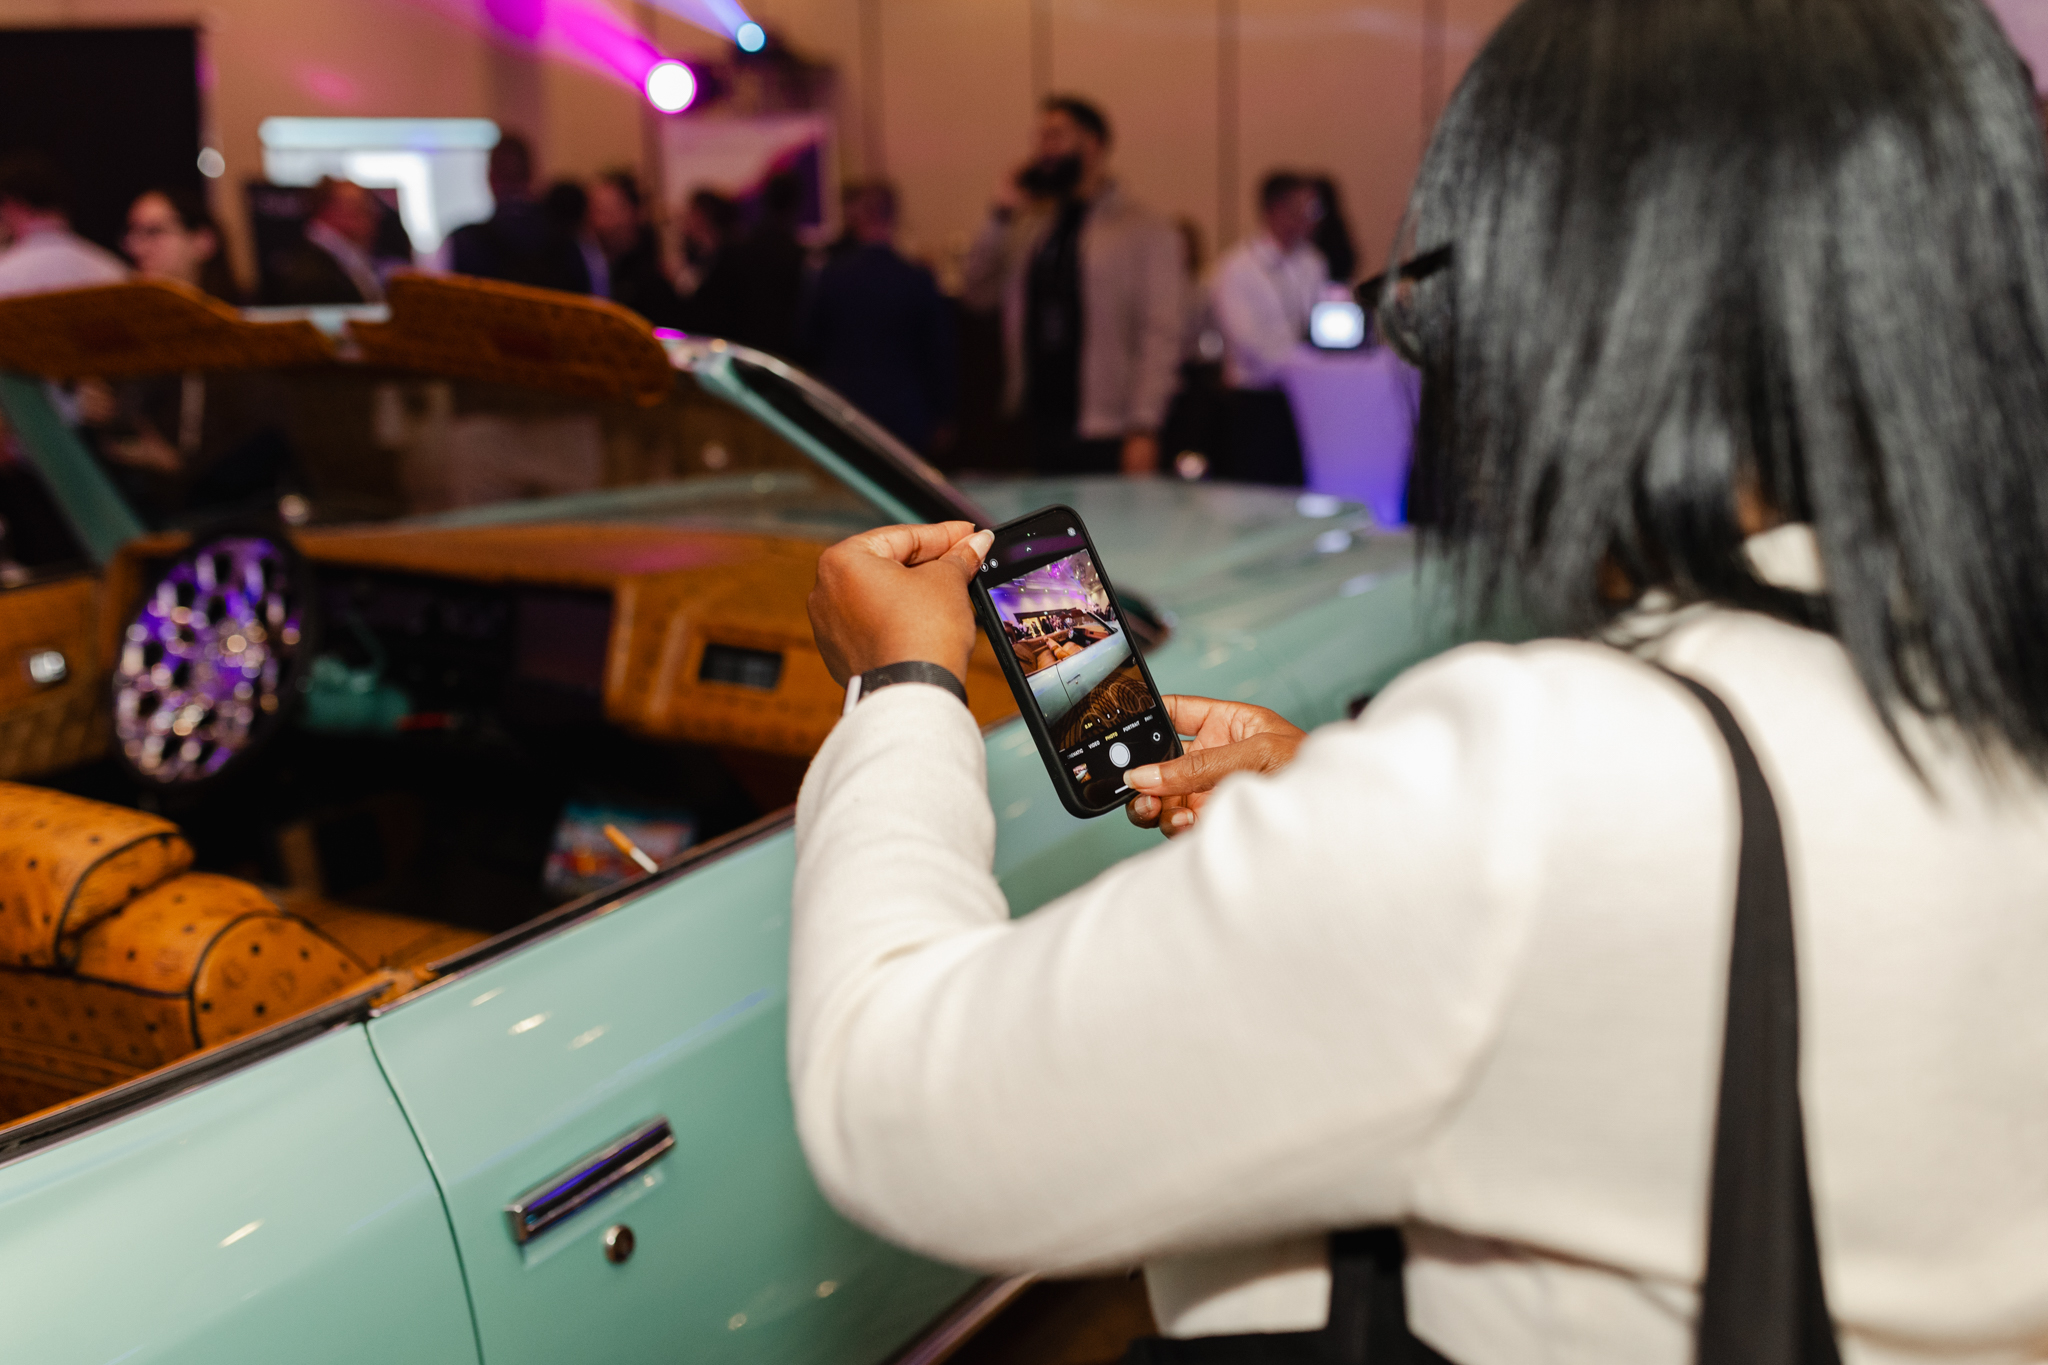 An event photographer capturing a woman photographing a car at an event.